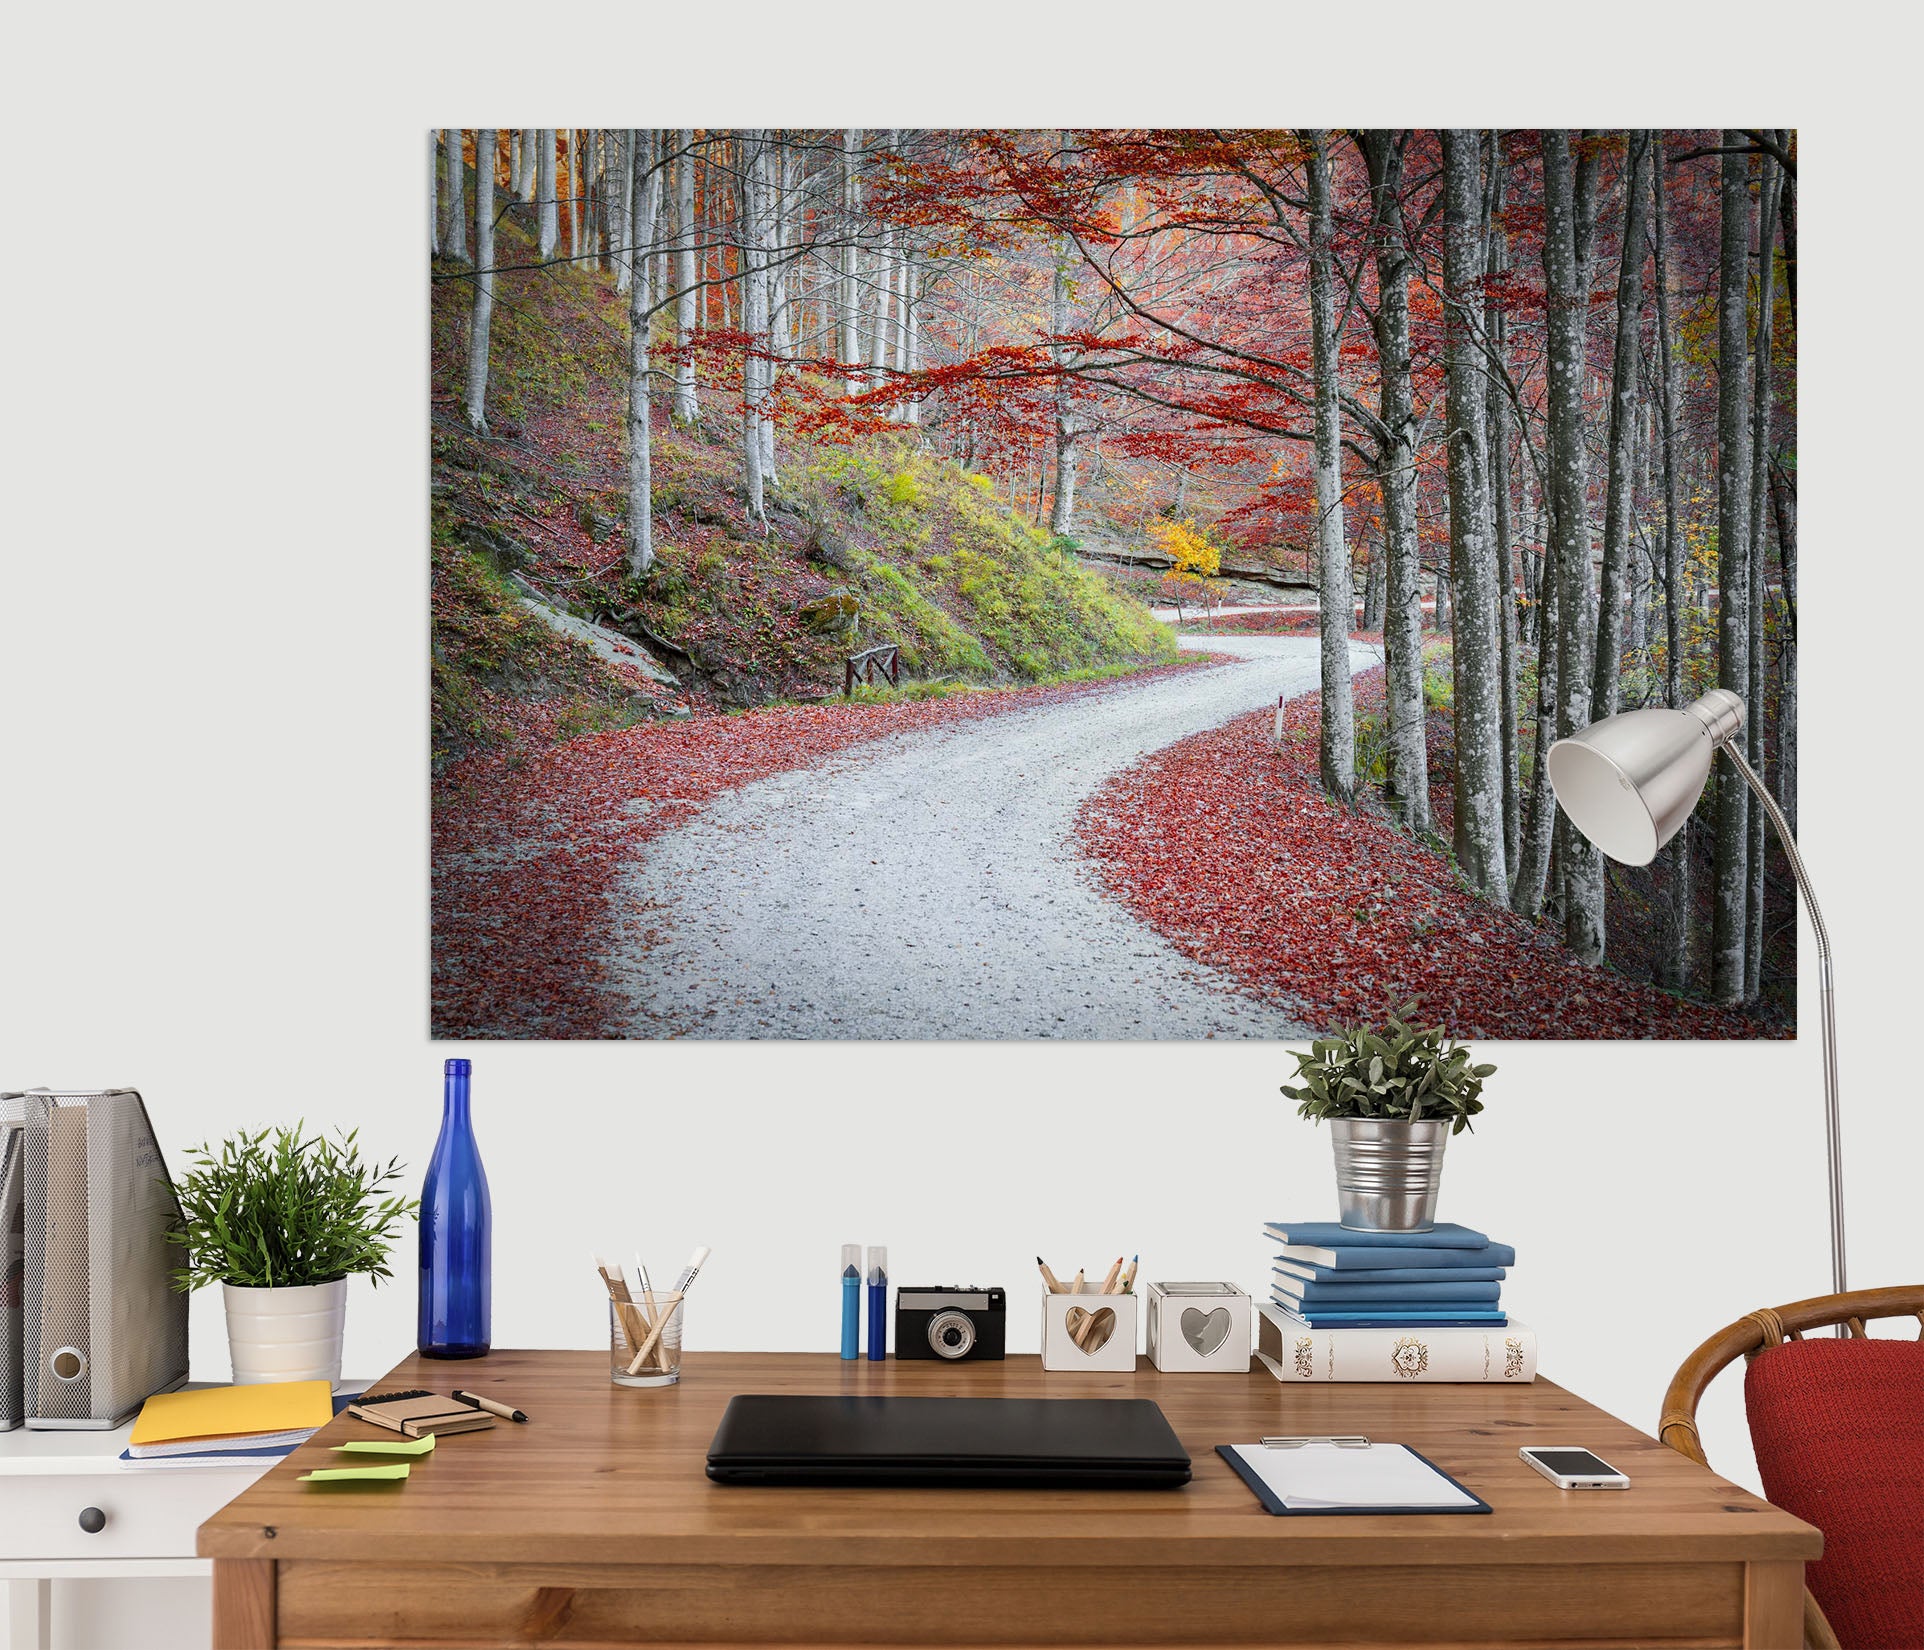 3D Forest Path 124 Marco Carmassi Wall Sticker